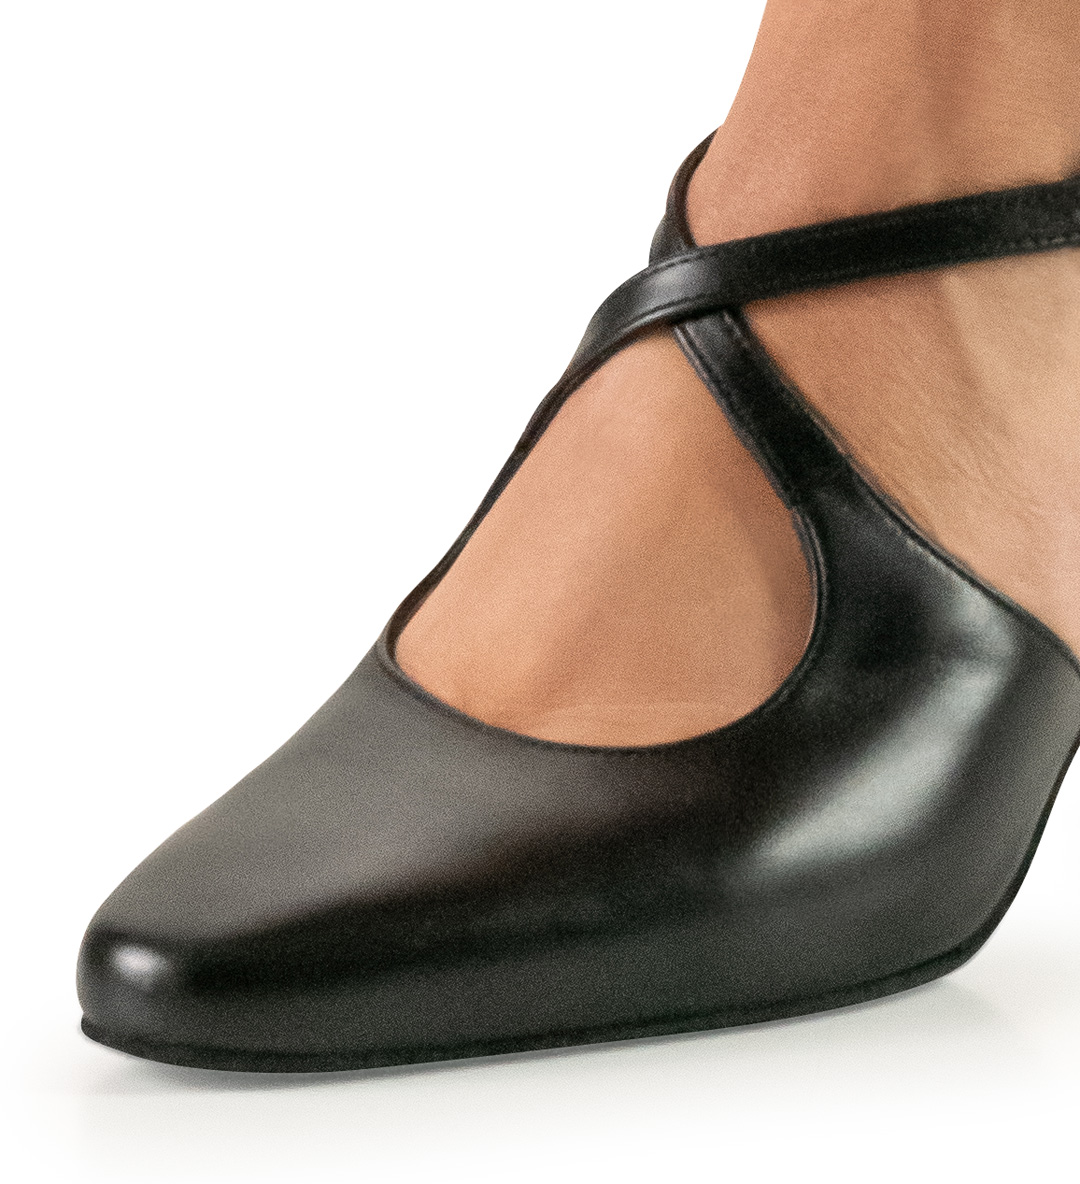 Detailed view of the Werner Kern Tango women's dance shoe straps 